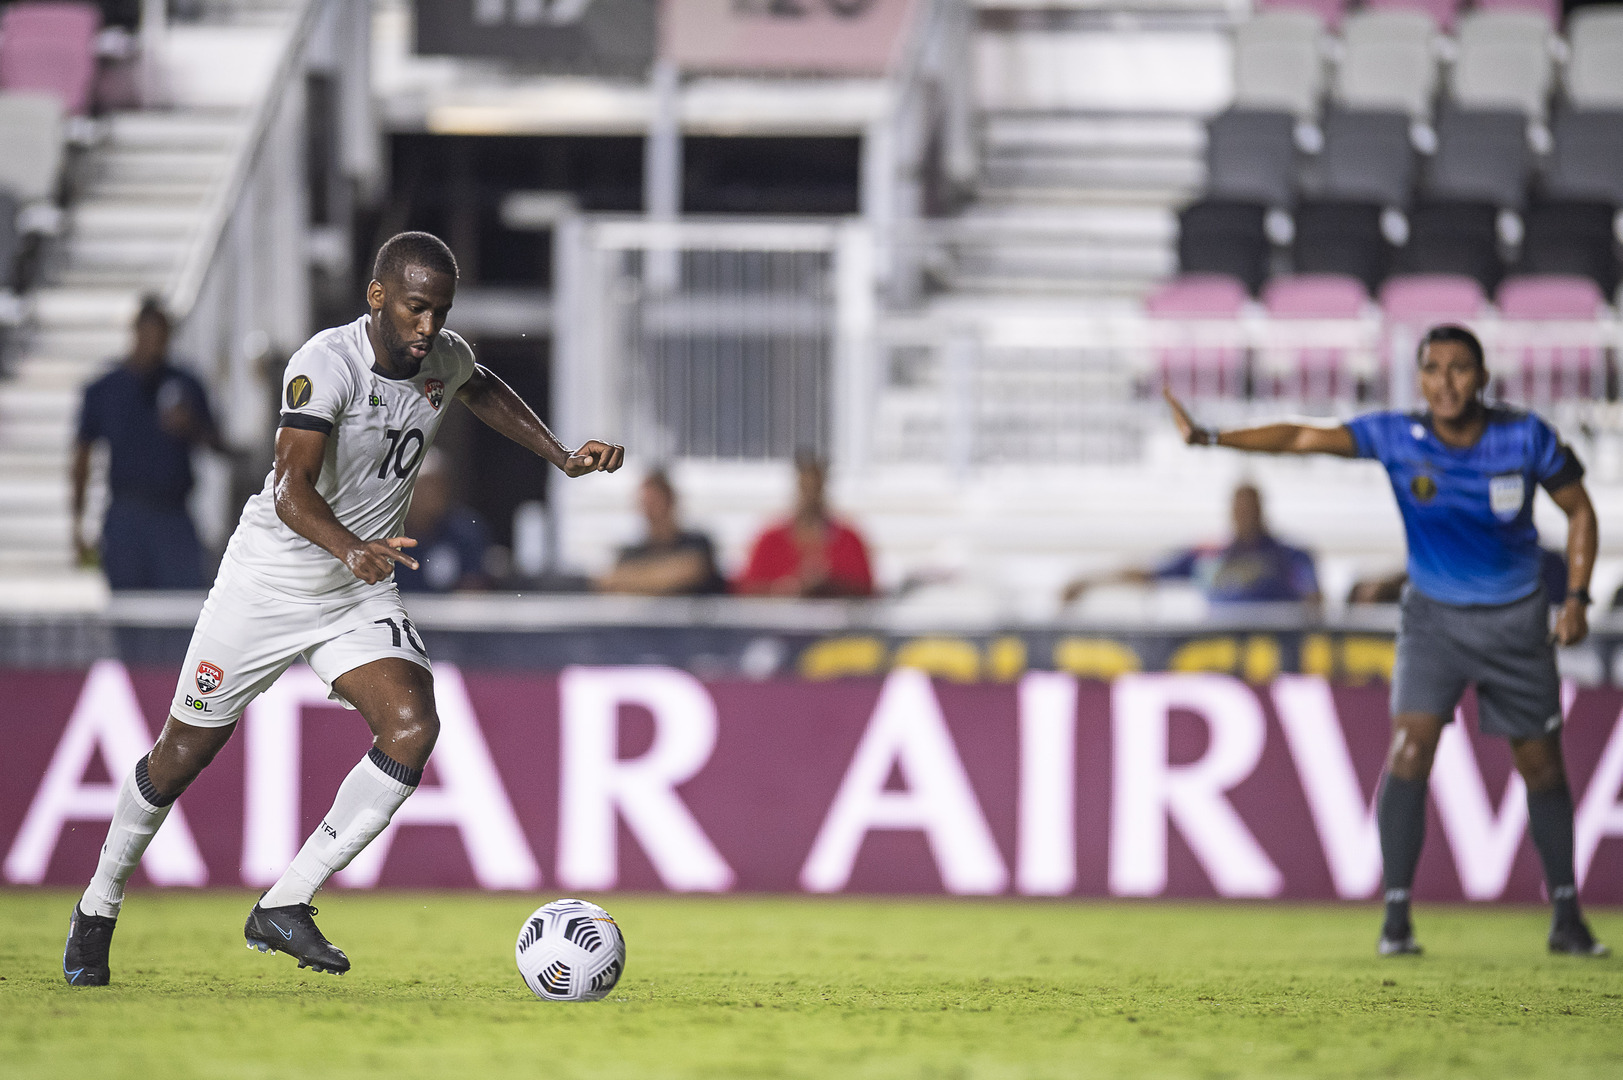 Trinidad and Tobago's Kevin Molino takes a penalty during a 2021 Concacaf Gold Cup Preliminary Round match against Montserrat at the DRV PNK Stadium, Ft. Lauderdale, FL on Friday, July 2nd 2021.